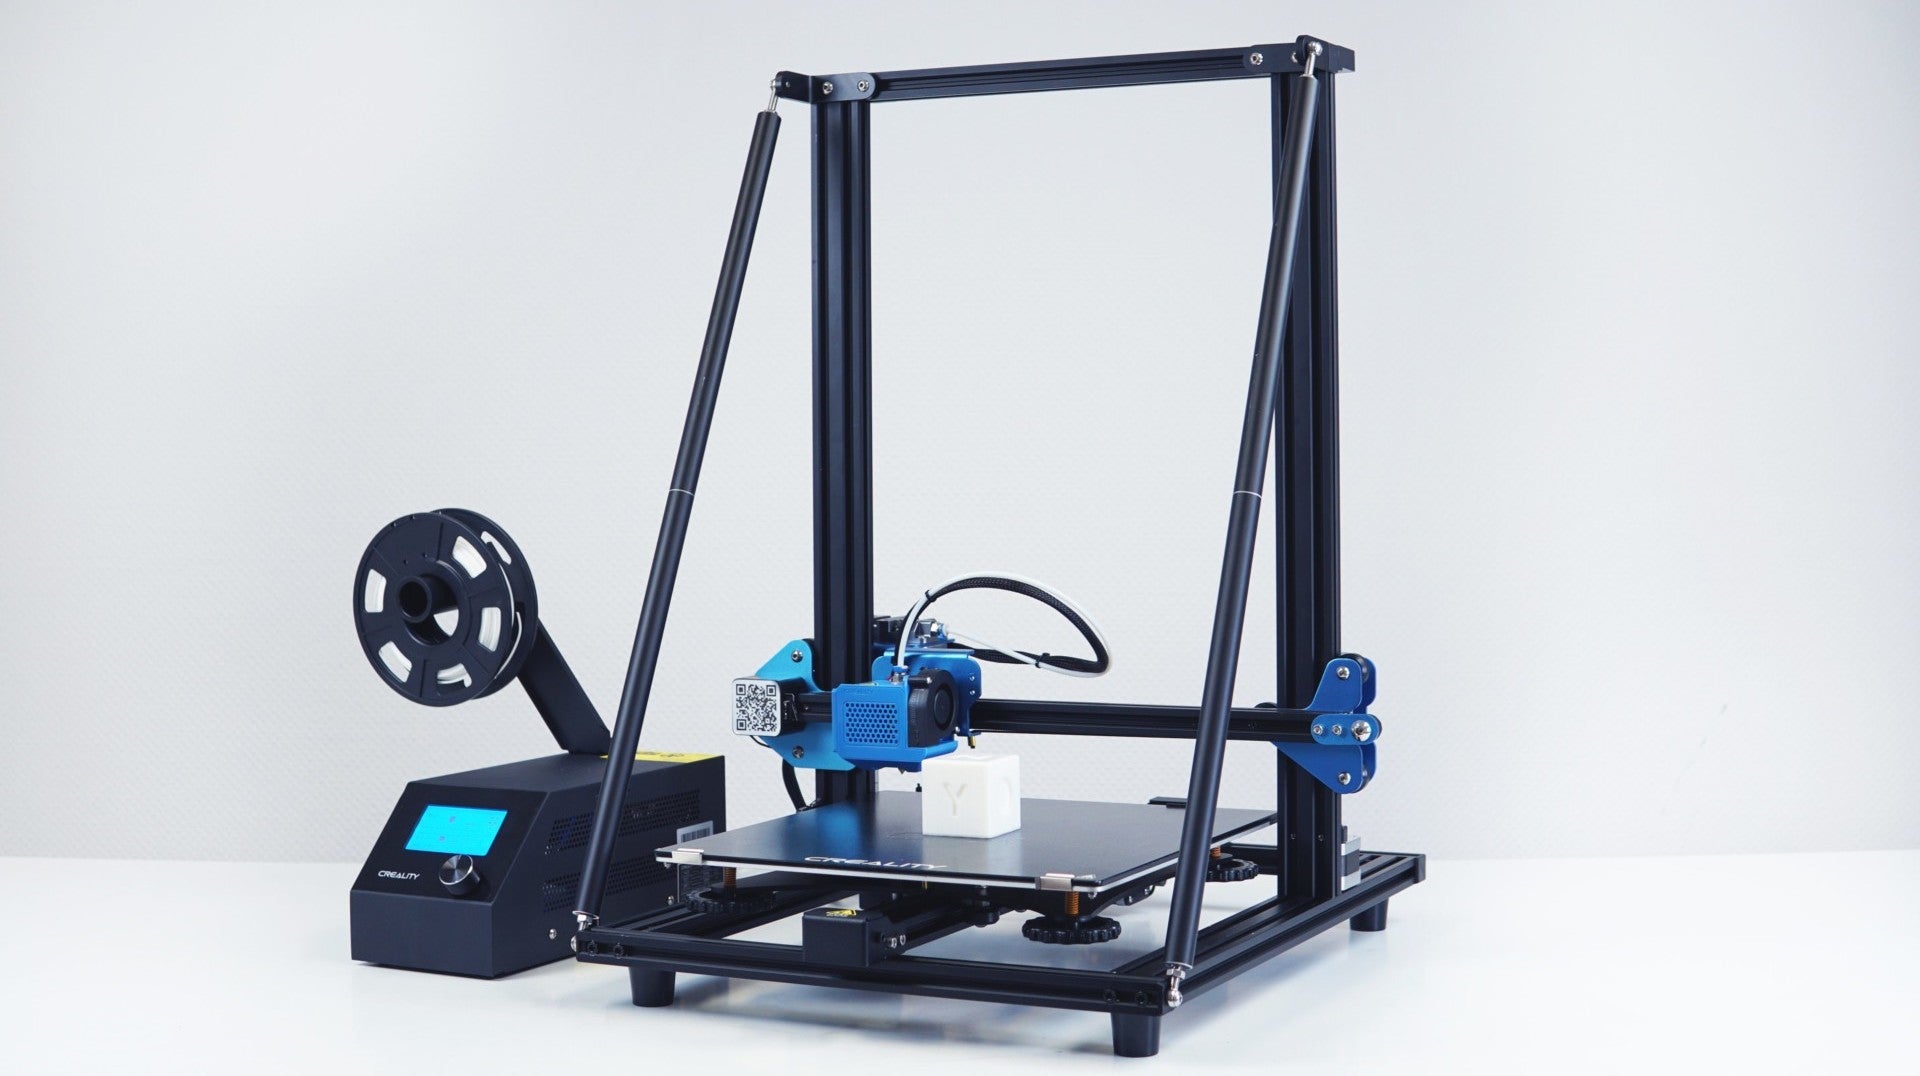 So want a 3D Printer? Welcome to the 3D Printing Community!